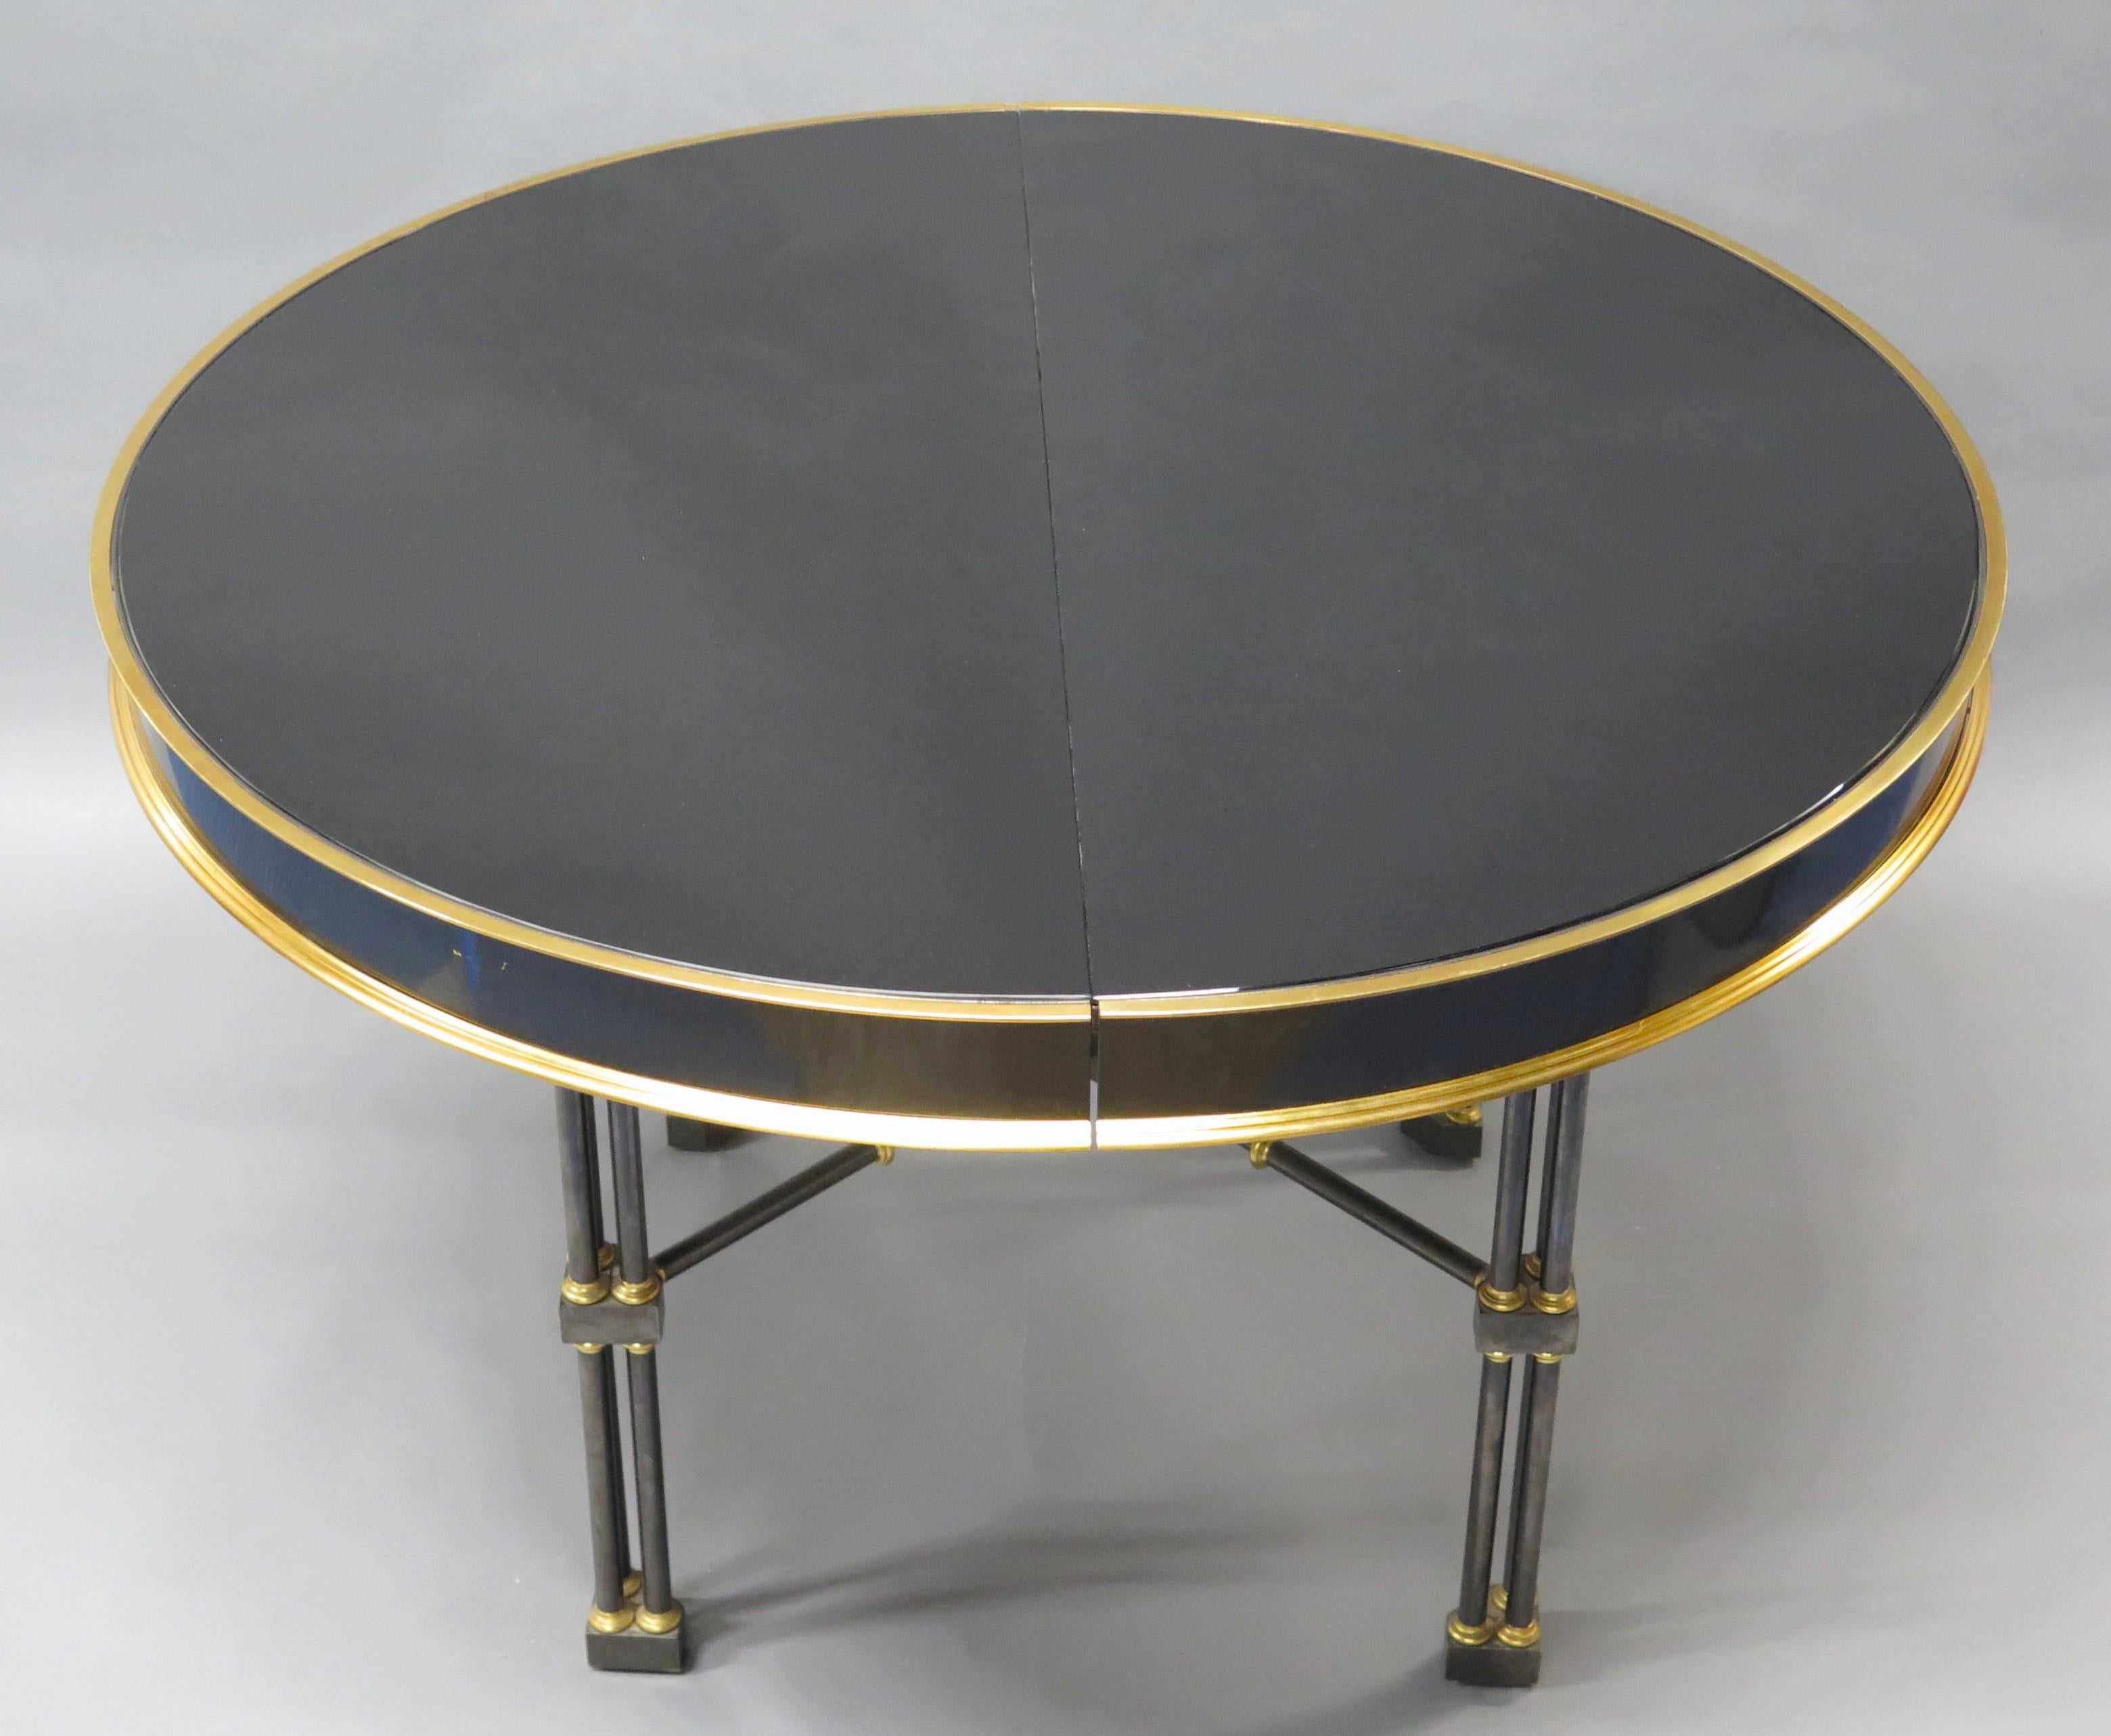 a vintage Ron Seff, Ltd. Chinese Chippendale-style / Brighton Pavilion-esque (legs resemble bamboo) dining or center table, bronze, gun metal and polished brass with black high gloss industrial glass top, seam down the middle once allowed leaf or